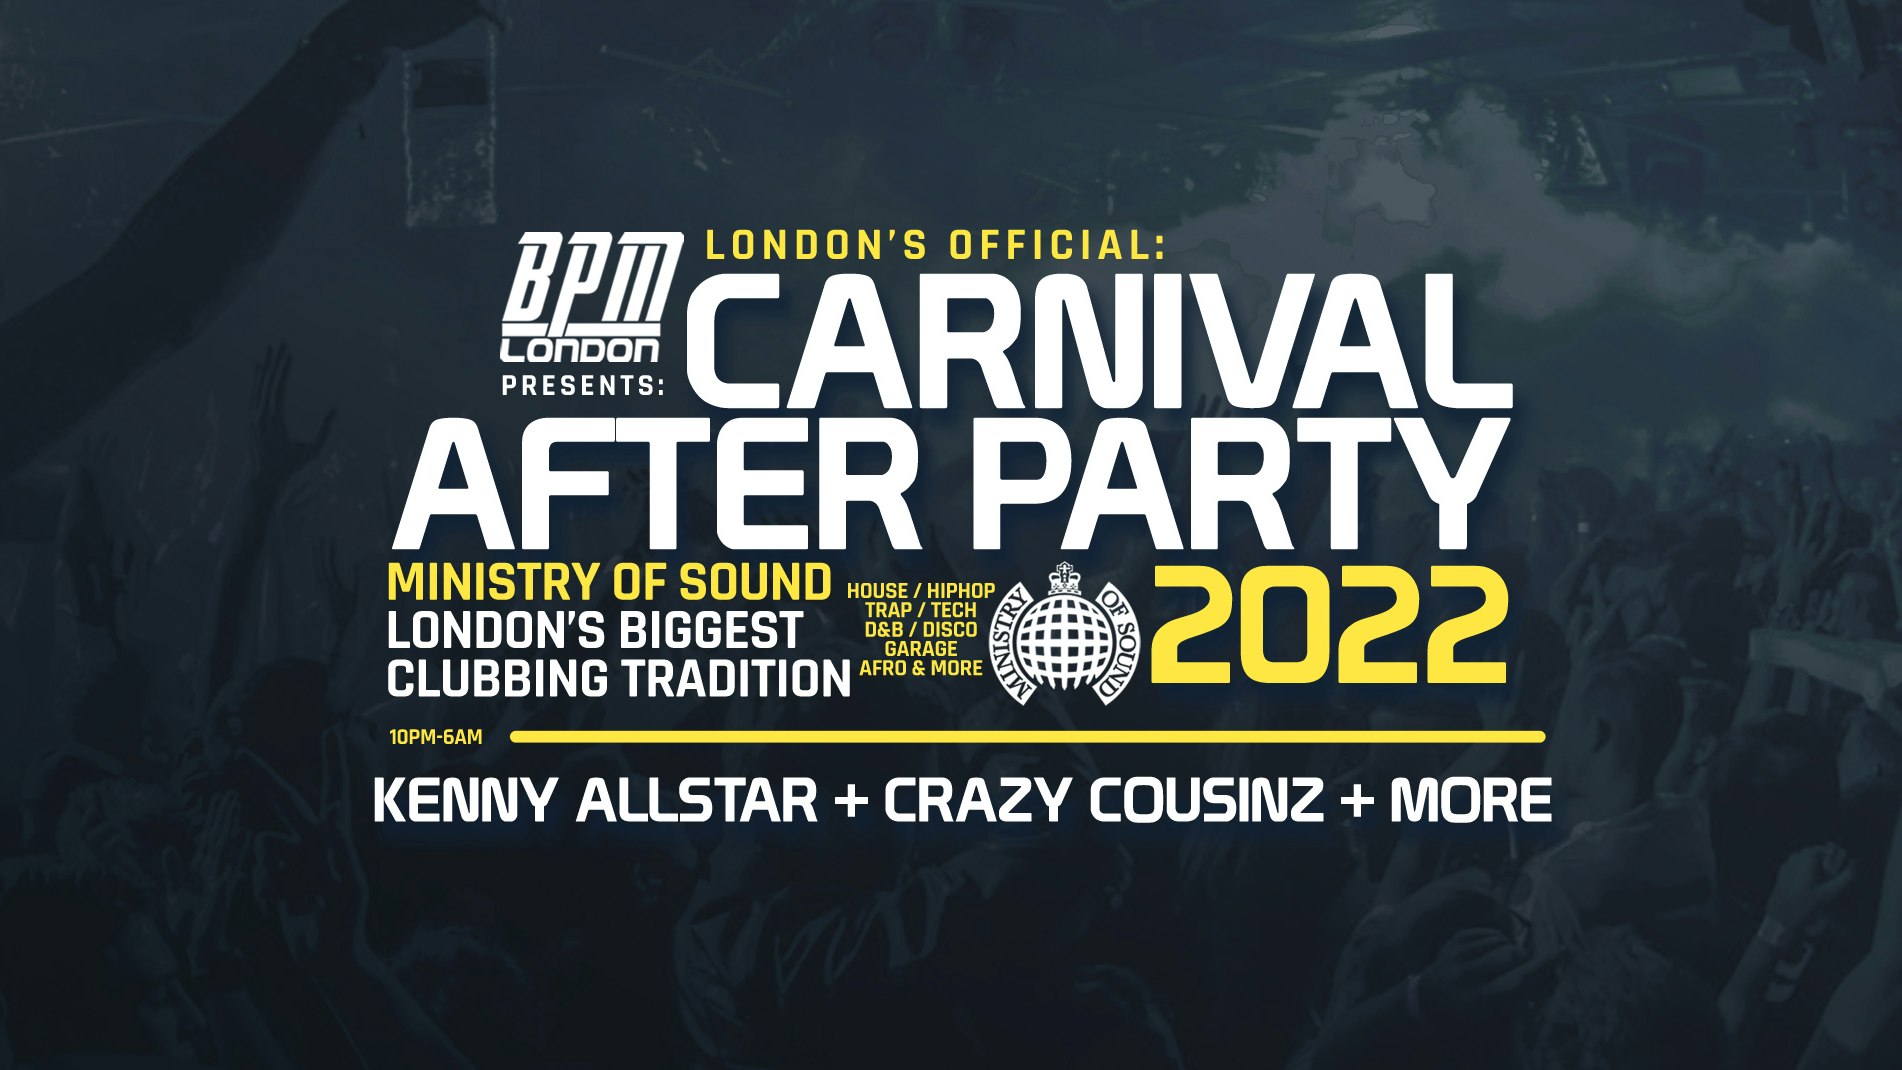 Ministry of Sound, Official Carnival After Party 2022 ft: Kenny Allstar, Crazy Cousinz & More